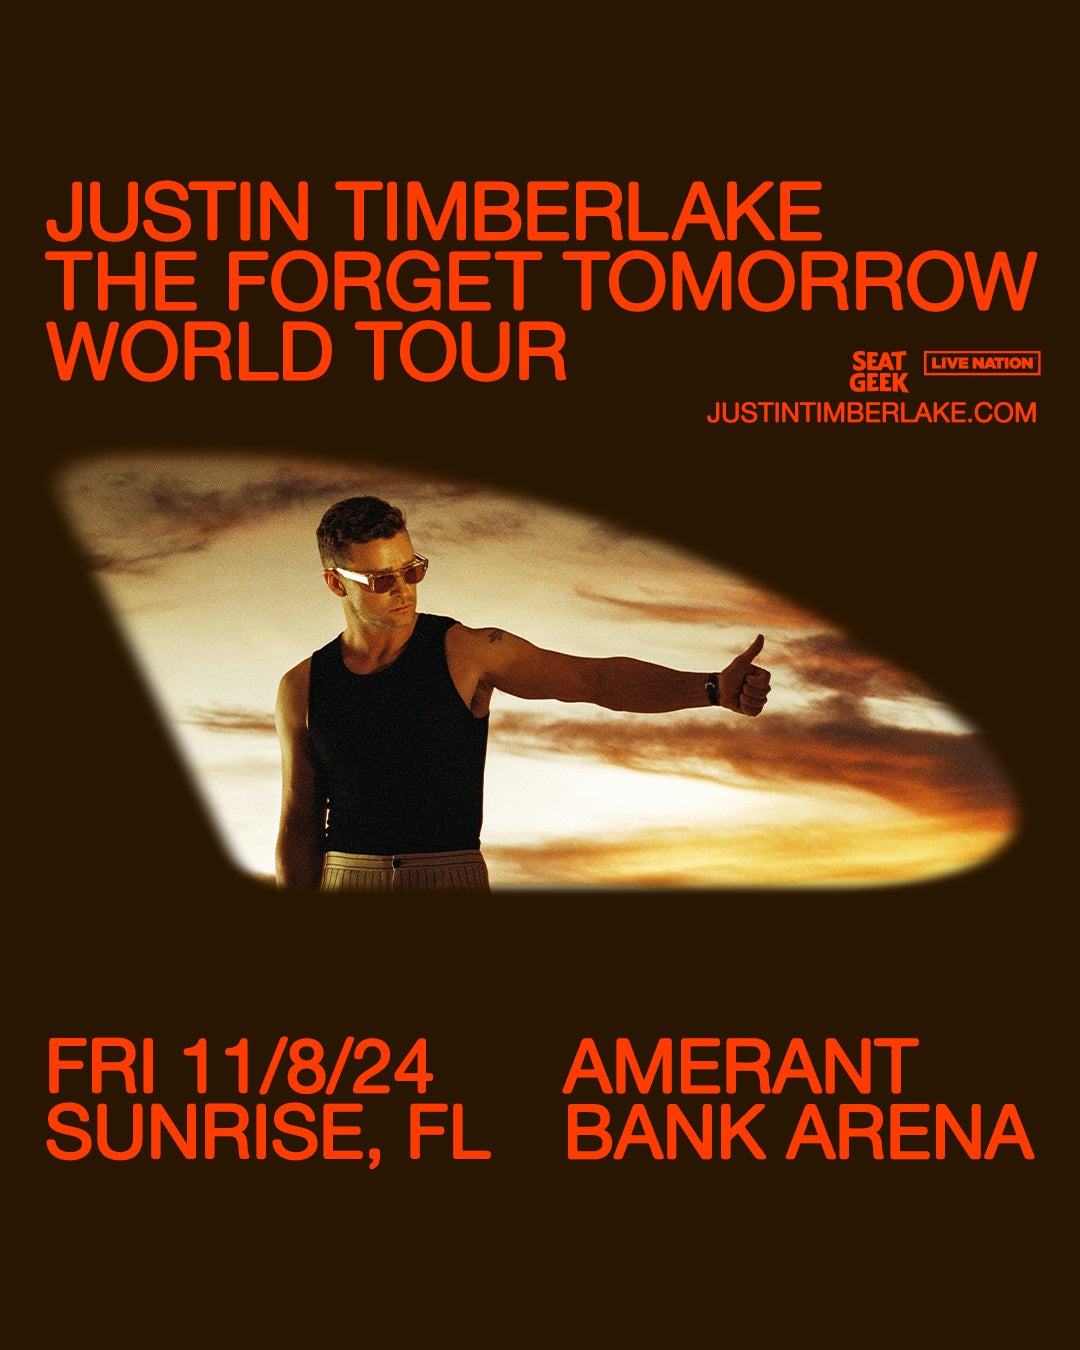 More Info for JUSTIN TIMBERLAKE ADDS AMERANT BANK ARENA SHOW ON FRIDAY, NOV. 8 TO SECOND LEG OF THE FORGET TOMORROW WORLD TOUR